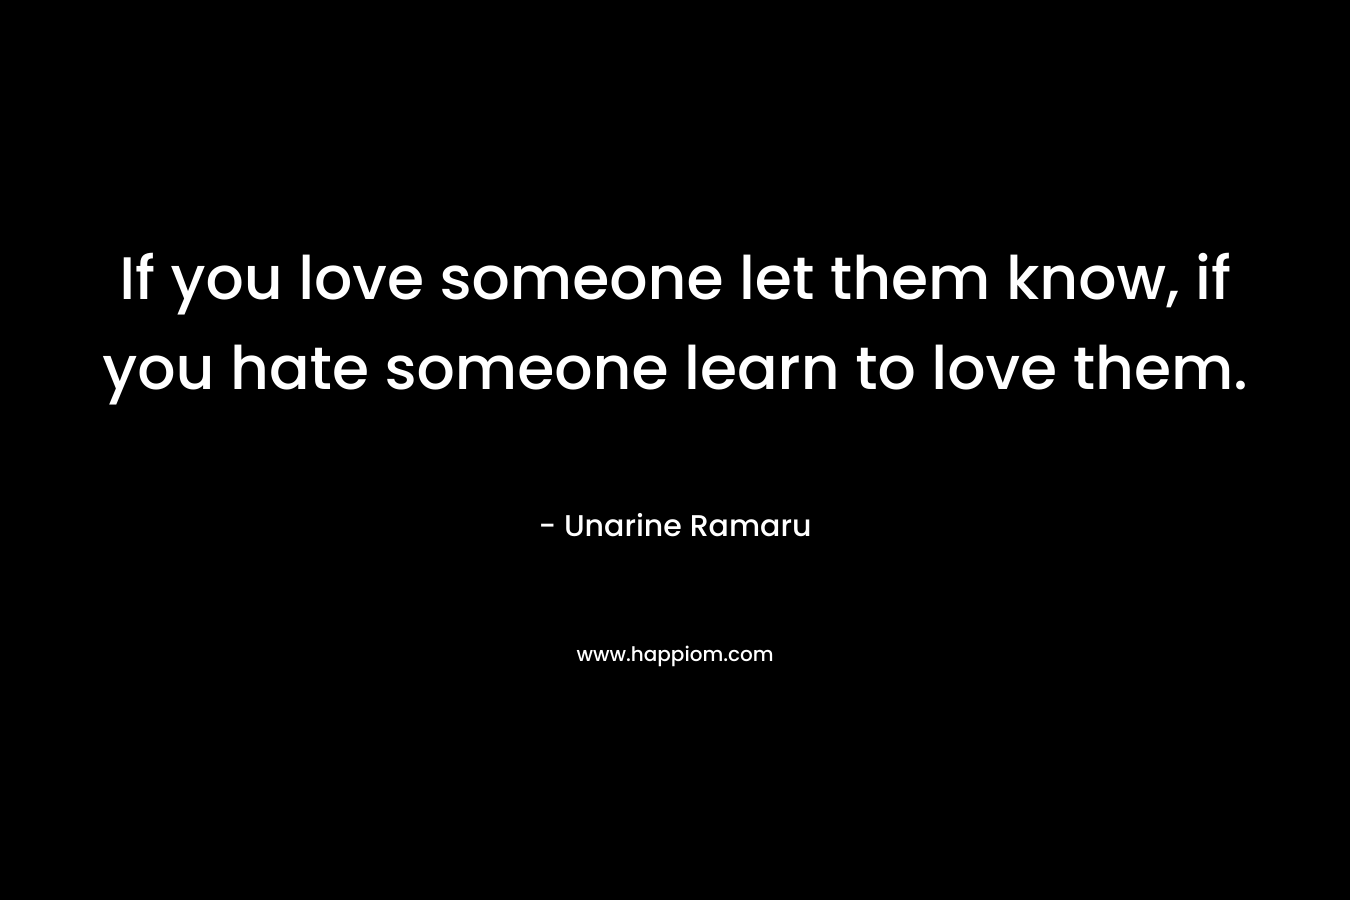 If you love someone let them know, if you hate someone learn to love them.